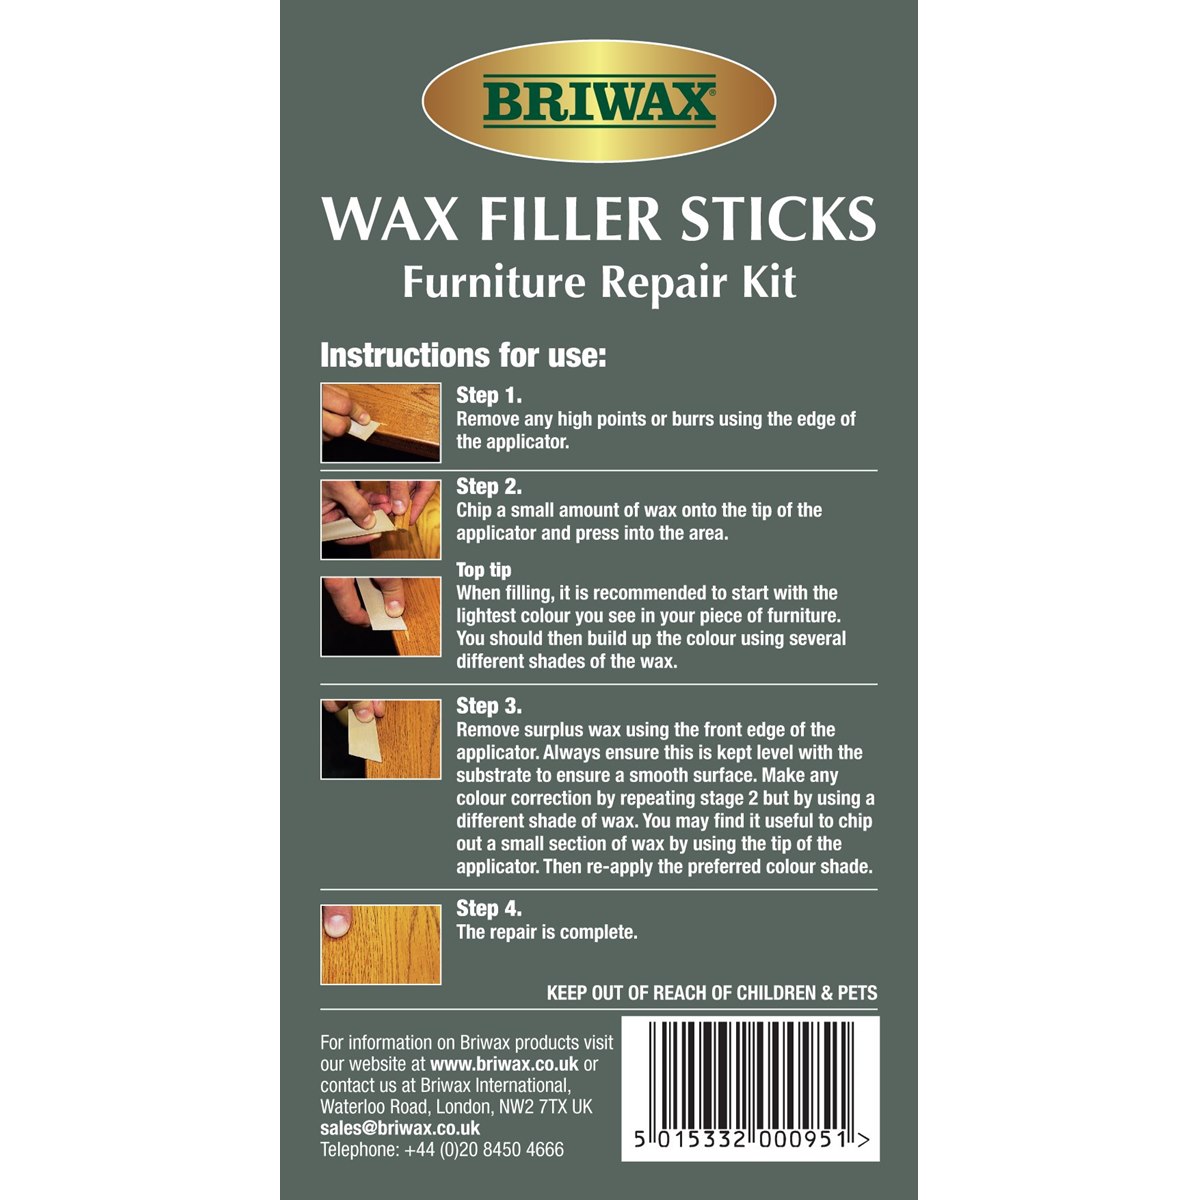 How to use Briwax Wax Filler Sticks 